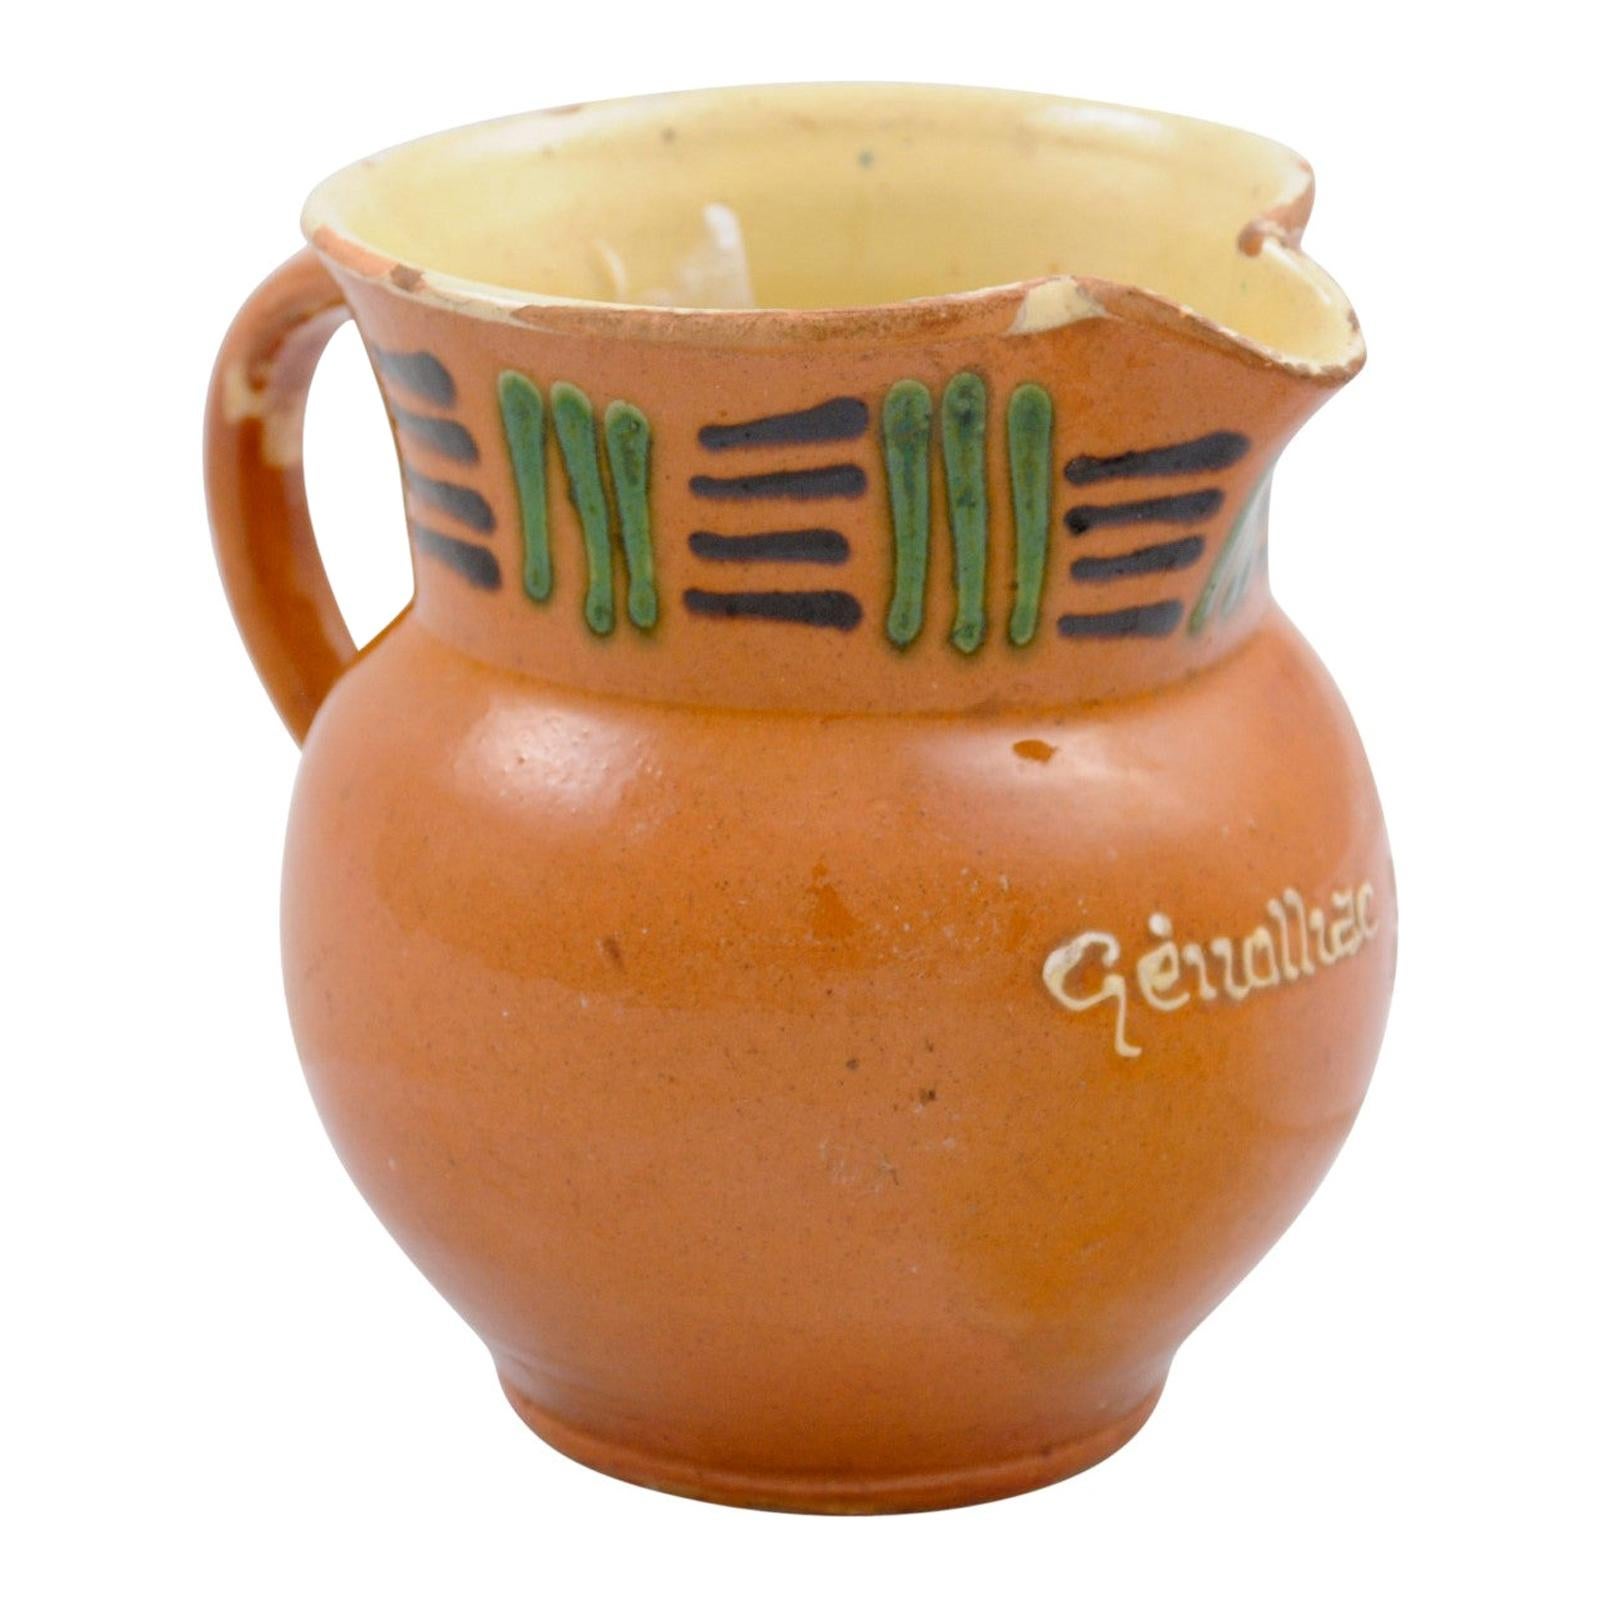 French 19th Century Terracotta Pitcher from Génolhac with Russet Colored Glaze For Sale